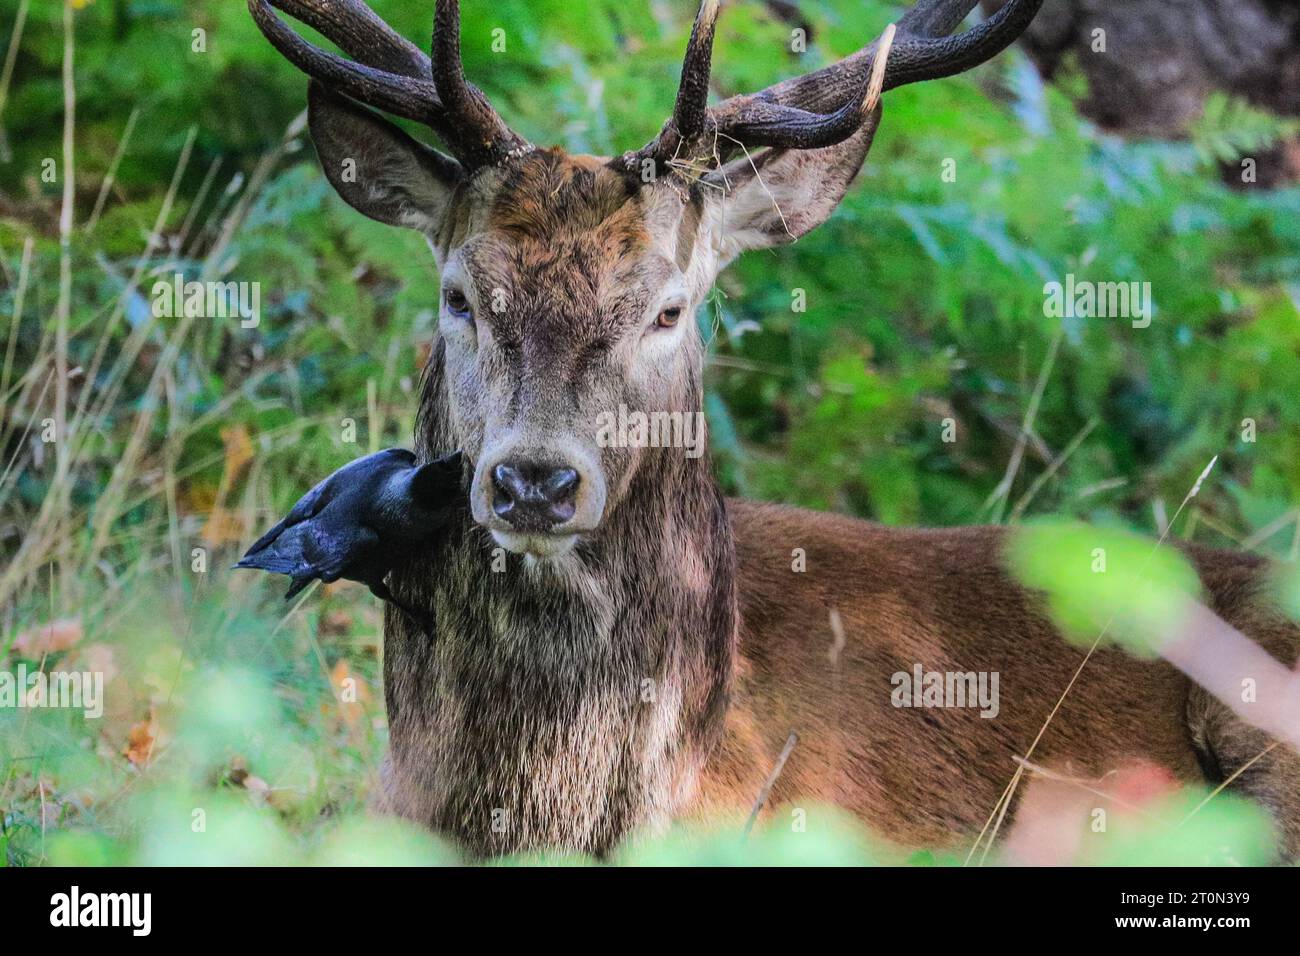 Surrey, UK. 08th Oct, 2023. Jackdaws pick fleas and insects of stags and female deers and are usually tolerated by the deer as a 'friendly helper'. A stag bellows, hidden in ferns. Adult red deer stags (cervus elaphus, male) get ready by the rutting season in the wide open spaces and woodland of Richmond Park in Surrey on a sunny Sunday morning. They bellow, decorate their antlers with grass, fern and tree branches to make themselves look more impressive, and eventually fight locking antlers later in the season to establish their dominance. Credit: Imageplotter/Alamy Live News Stock Photo